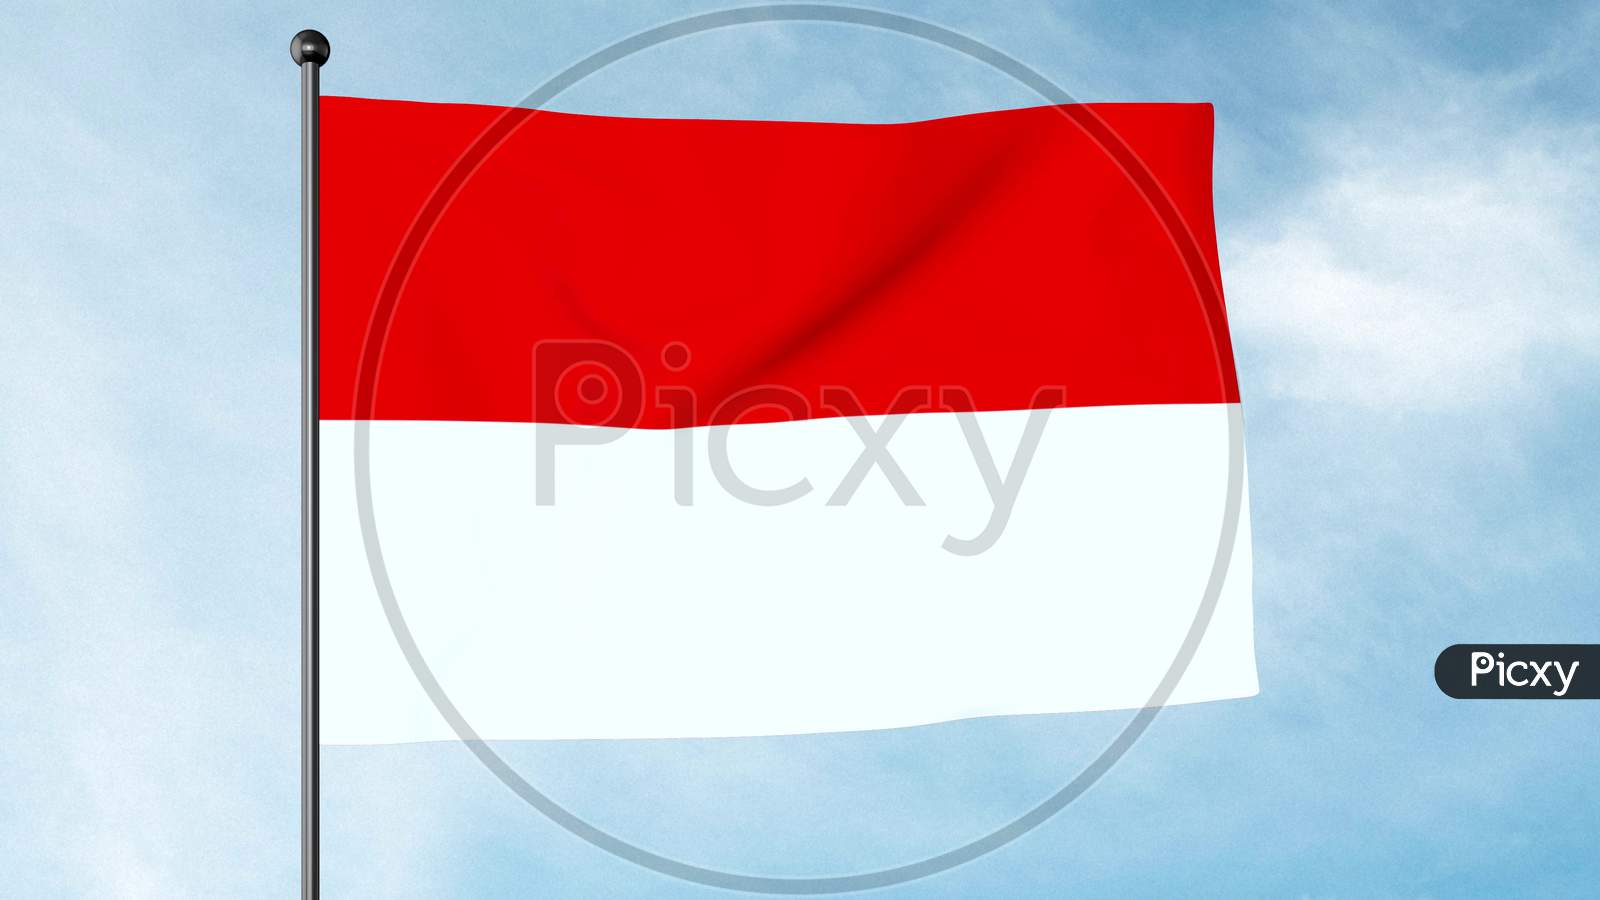 3D Illustration Of The Flag Of Indonesia Is A Simple Bicolor With Two Equal Horizontal Bands, Red And White With An Overall Ratio Of 2:3.